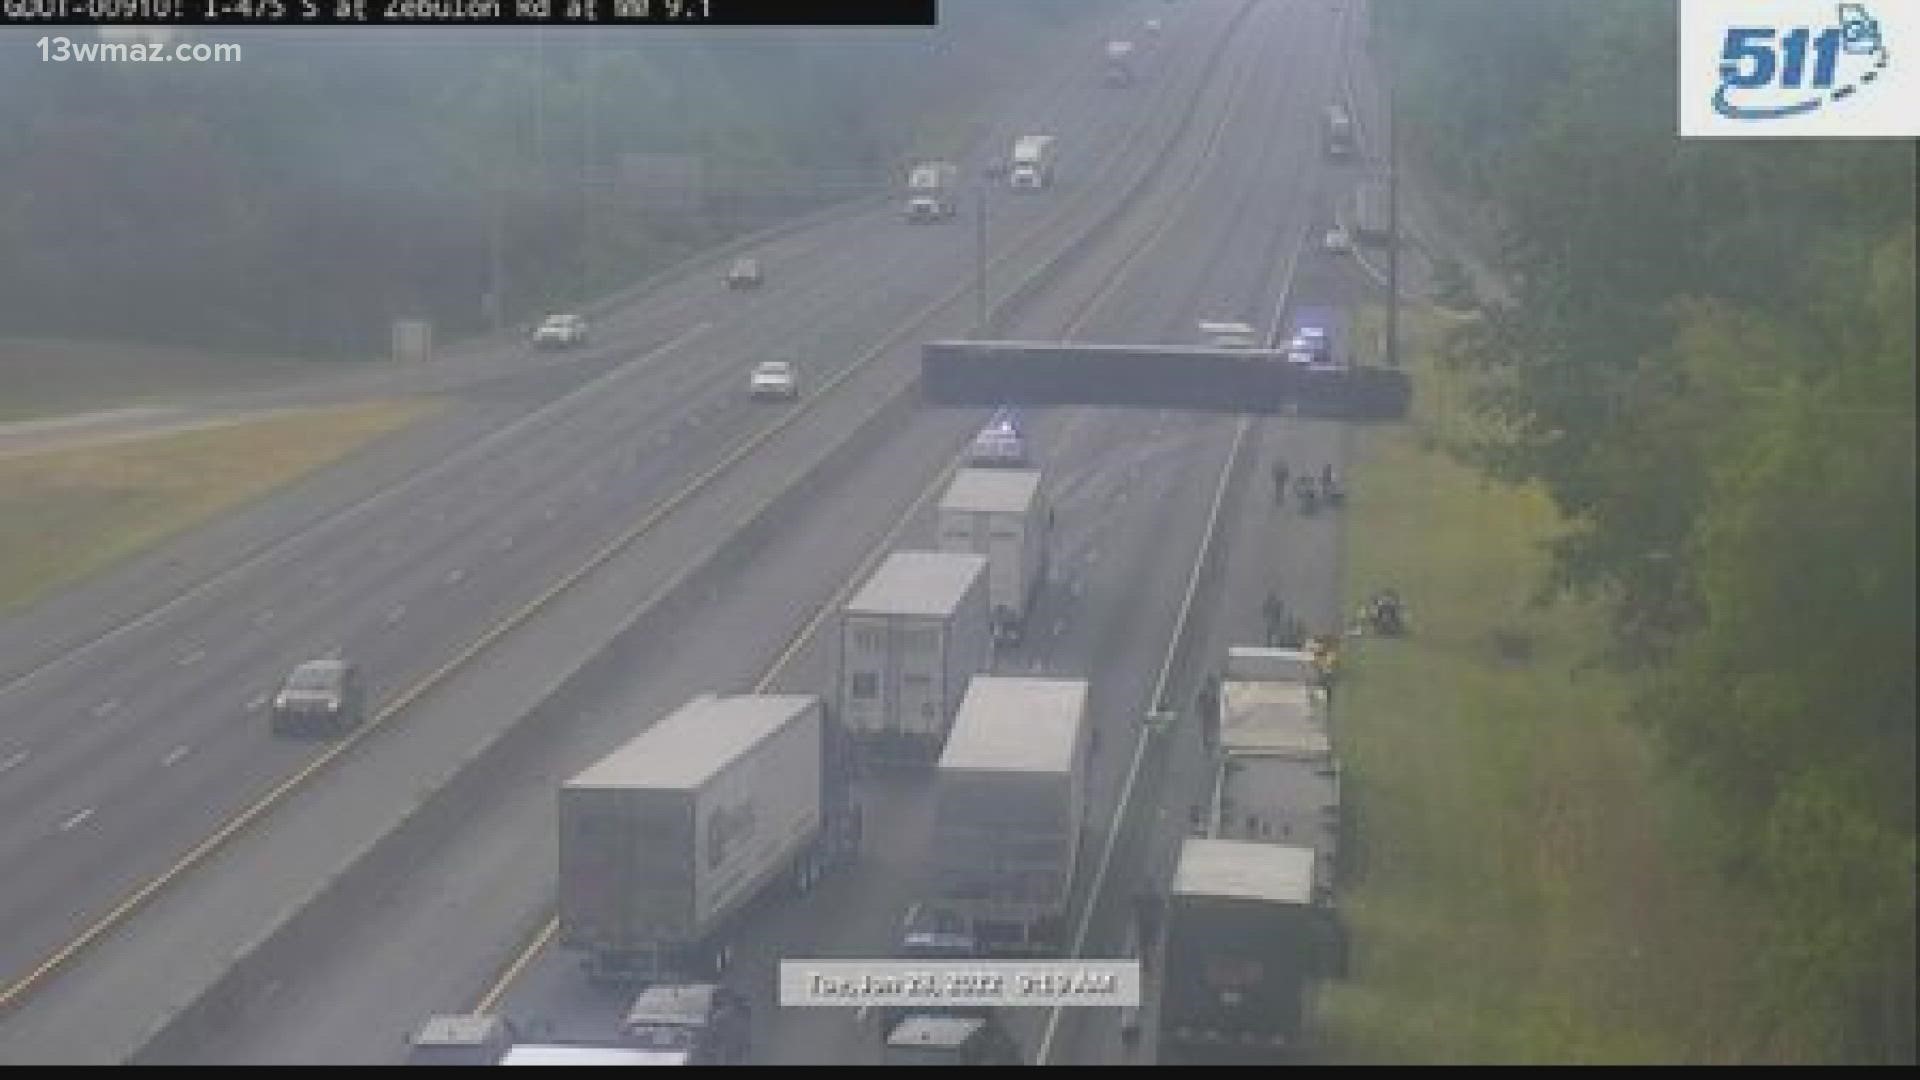 All lanes of traffic going south on I-475 are blocked.